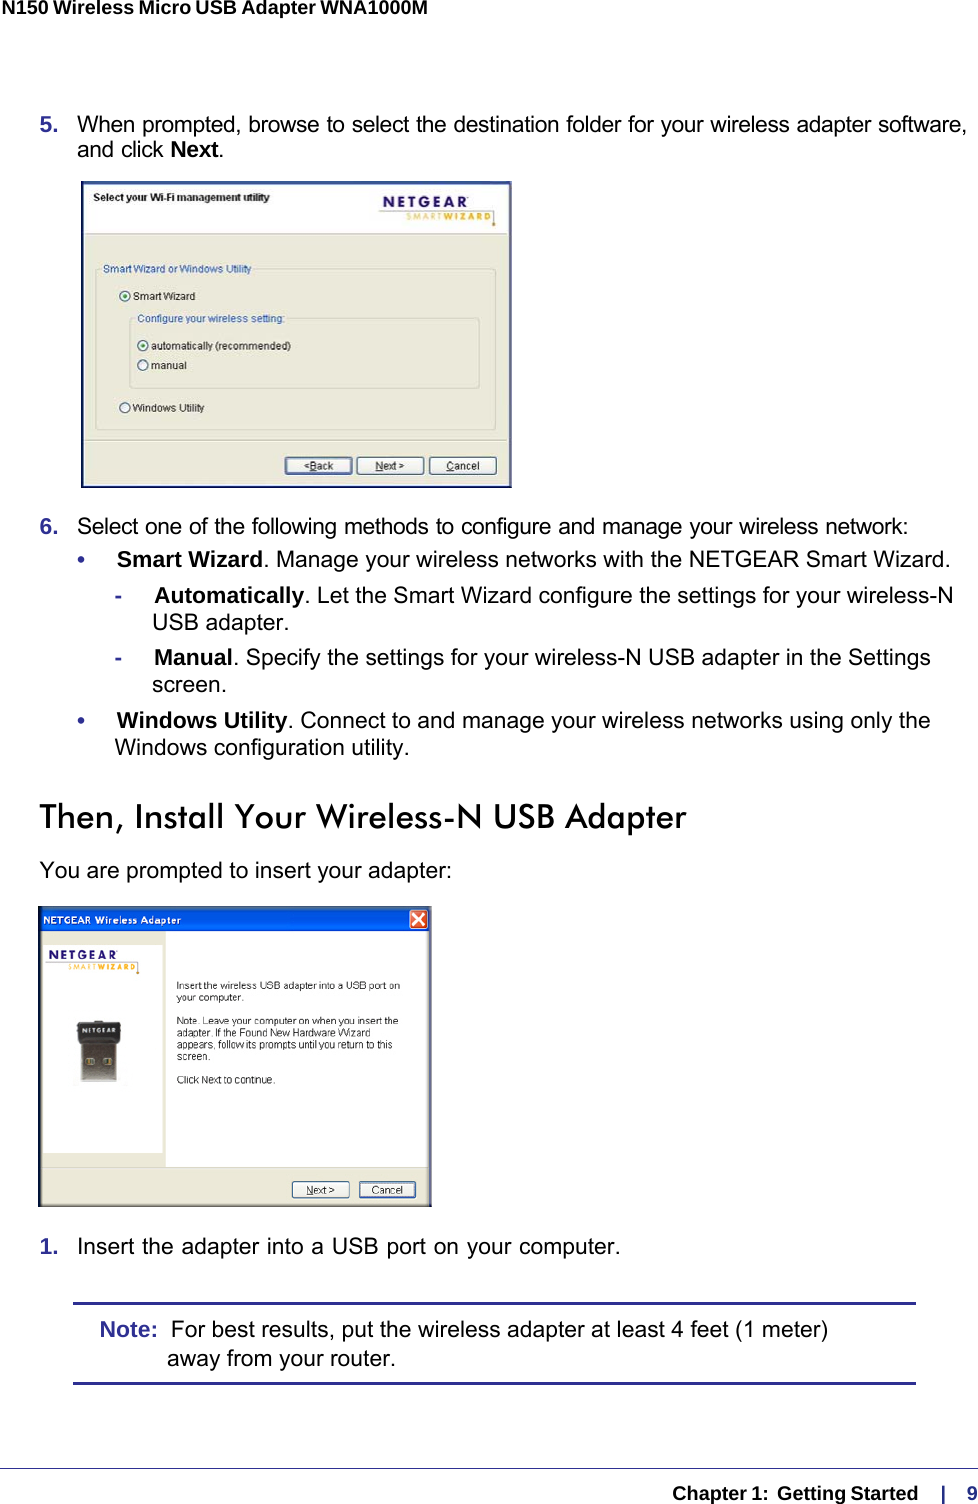   Chapter 1:  Getting Started    |    9N150 Wireless Micro USB Adapter WNA1000M 5.  When prompted, browse to select the destination folder for your wireless adapter software, and click Next.6.  Select one of the following methods to configure and manage your wireless network:•     Smart Wizard. Manage your wireless networks with the NETGEAR Smart Wizard. -     Automatically. Let the Smart Wizard configure the settings for your wireless-N USB adapter. -     Manual. Specify the settings for your wireless-N USB adapter in the Settings screen.•     Windows Utility. Connect to and manage your wireless networks using only the Windows configuration utility. Then, Install Your Wireless-N USB AdapterYou are prompted to insert your adapter:1.  Insert the adapter into a USB port on your computer.Note:  For best results, put the wireless adapter at least 4 feet (1 meter) away from your router.